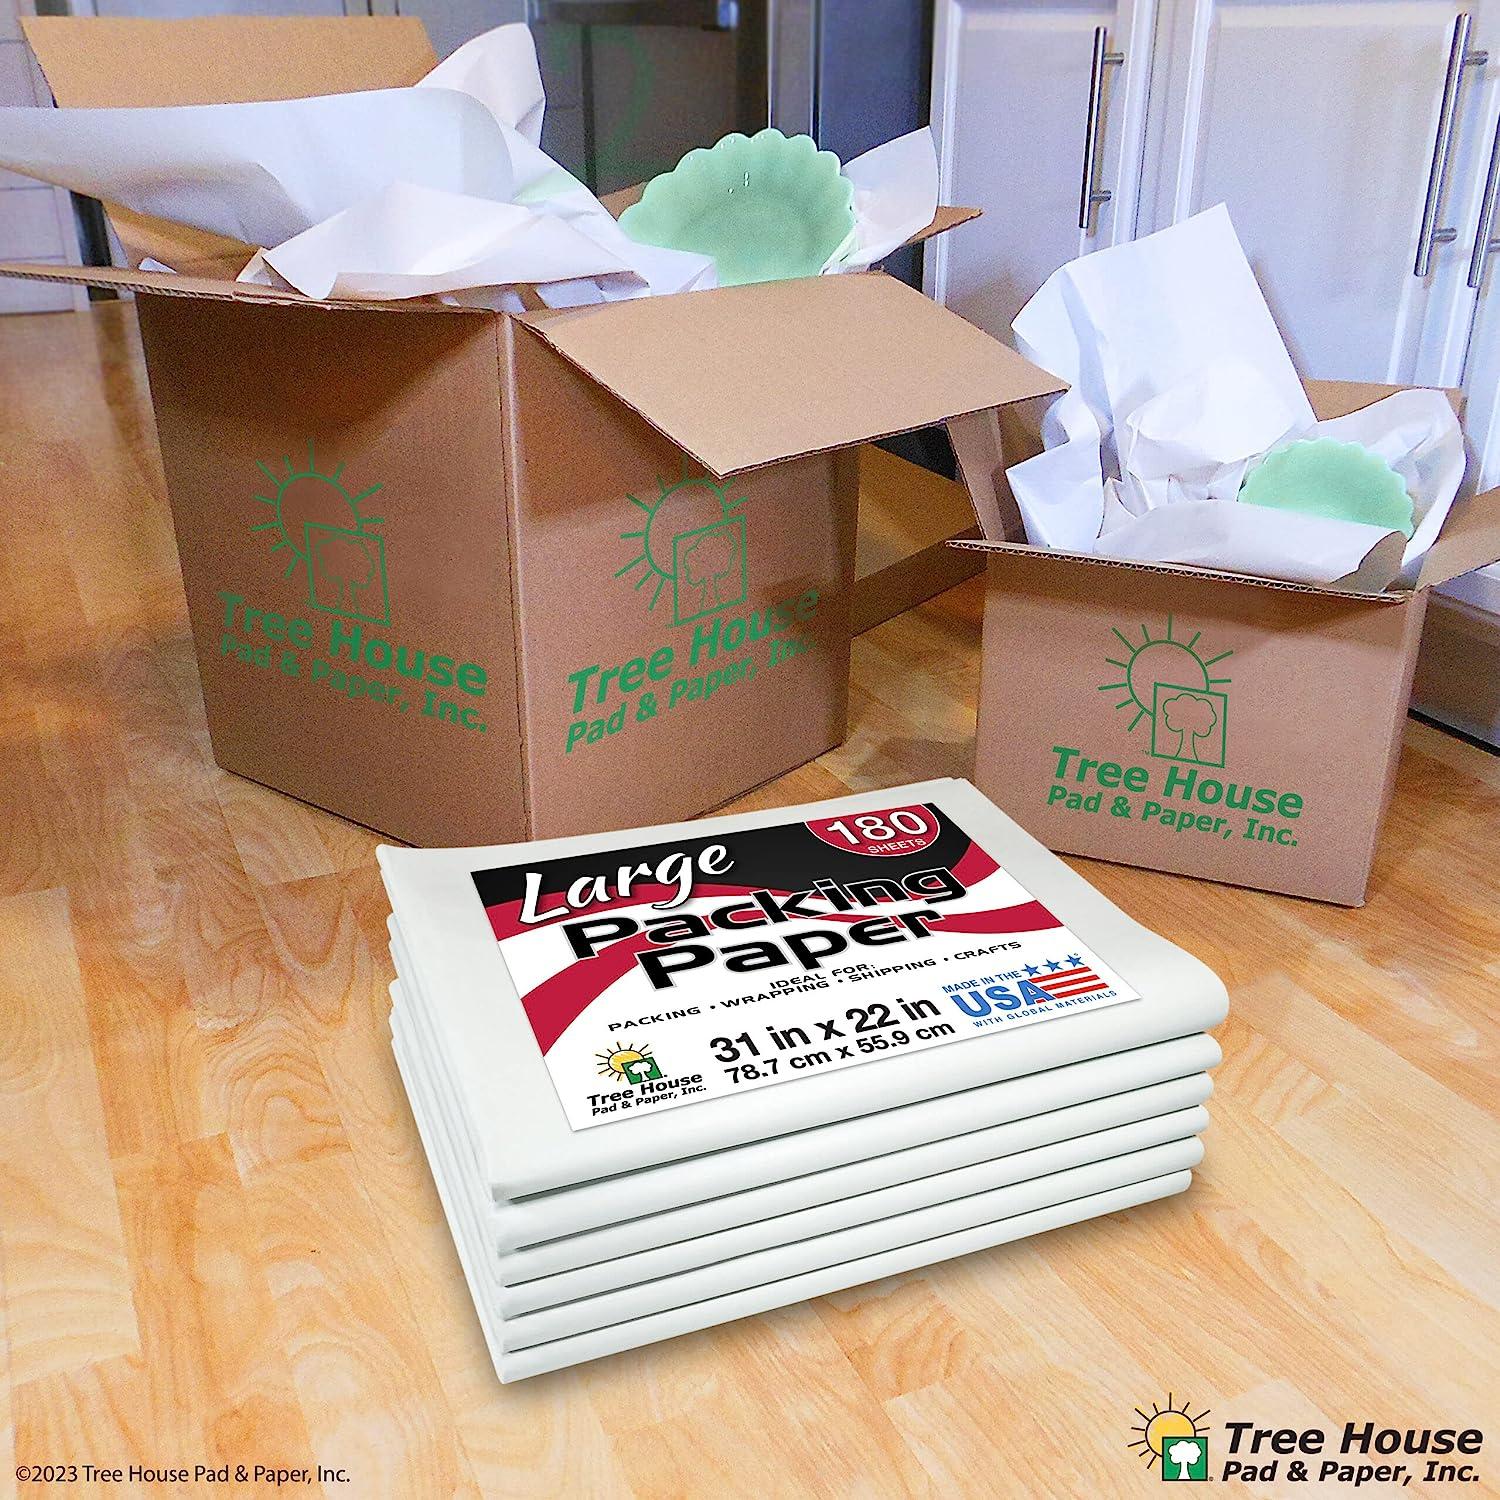 Packing Paper LARGE Sheets for Moving & Shipping, 180 Sheets of Newsprint,  31x22, Made in the USA